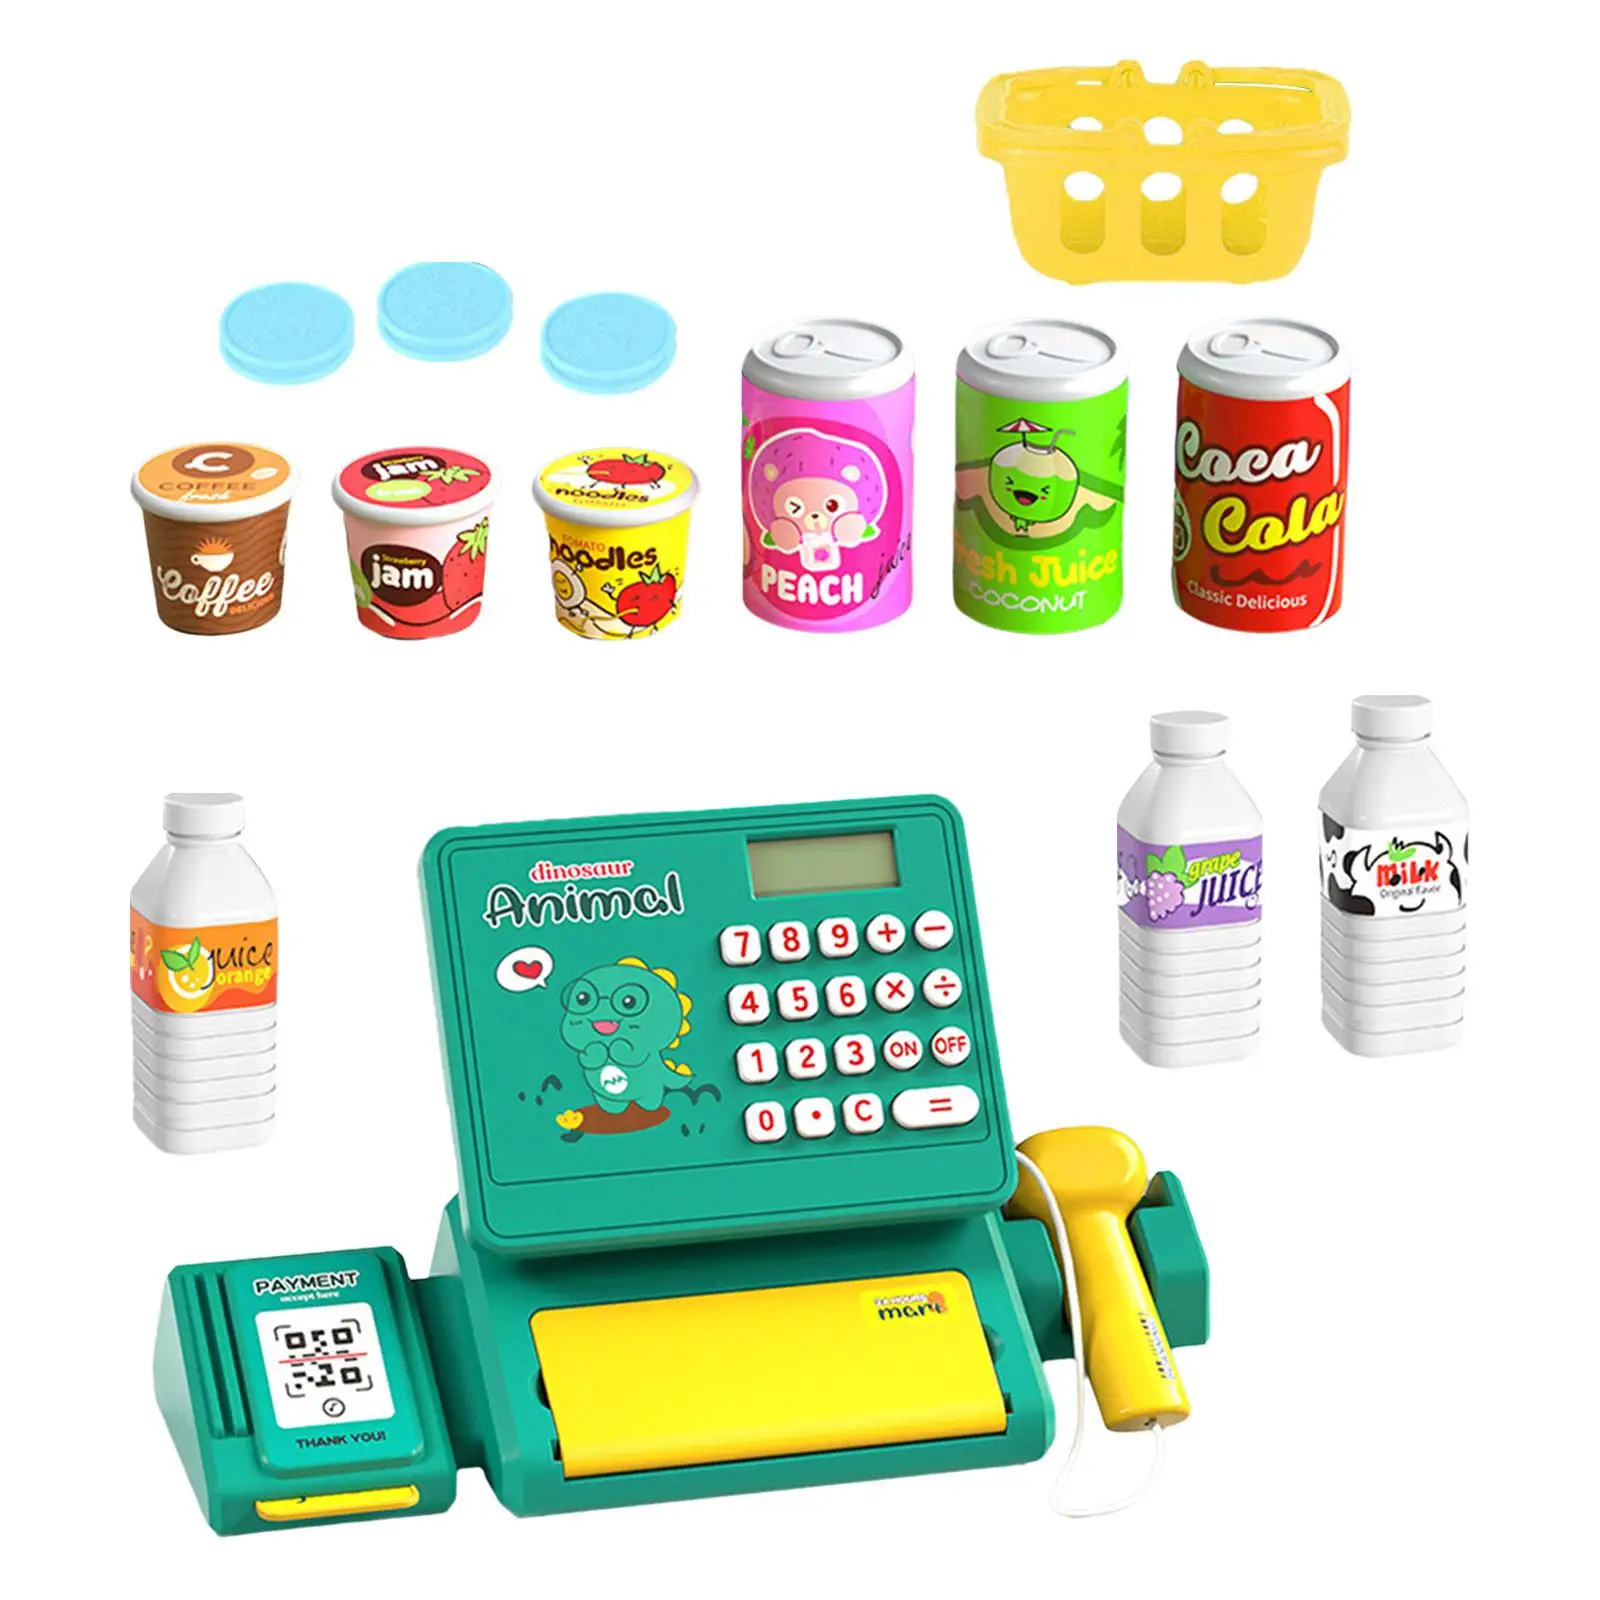 Kids Toy Till Cash Register , Pretend Role Play Shopping Till Food Toys Gift for